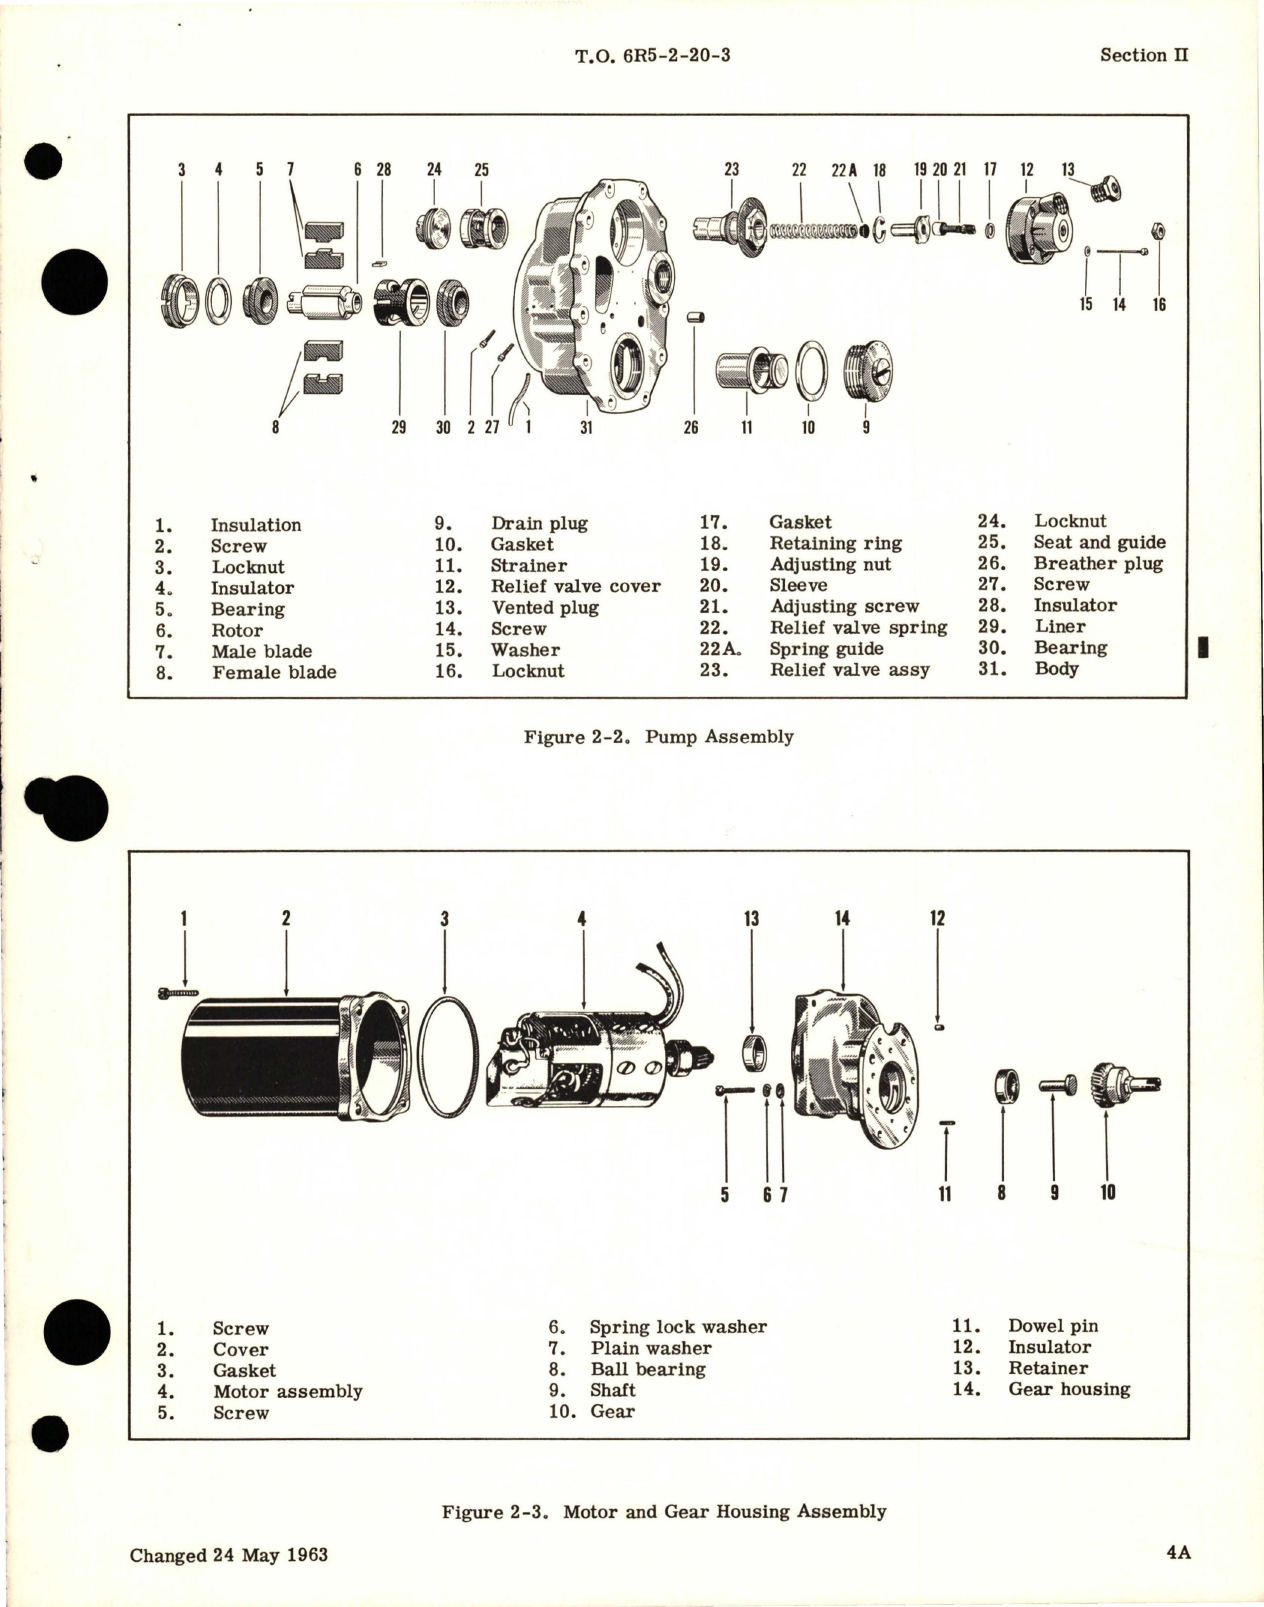 Sample page 9 from AirCorps Library document: Overhaul Instructions for Power Driven Rotary Pump - Models RG8825F and RG8825A